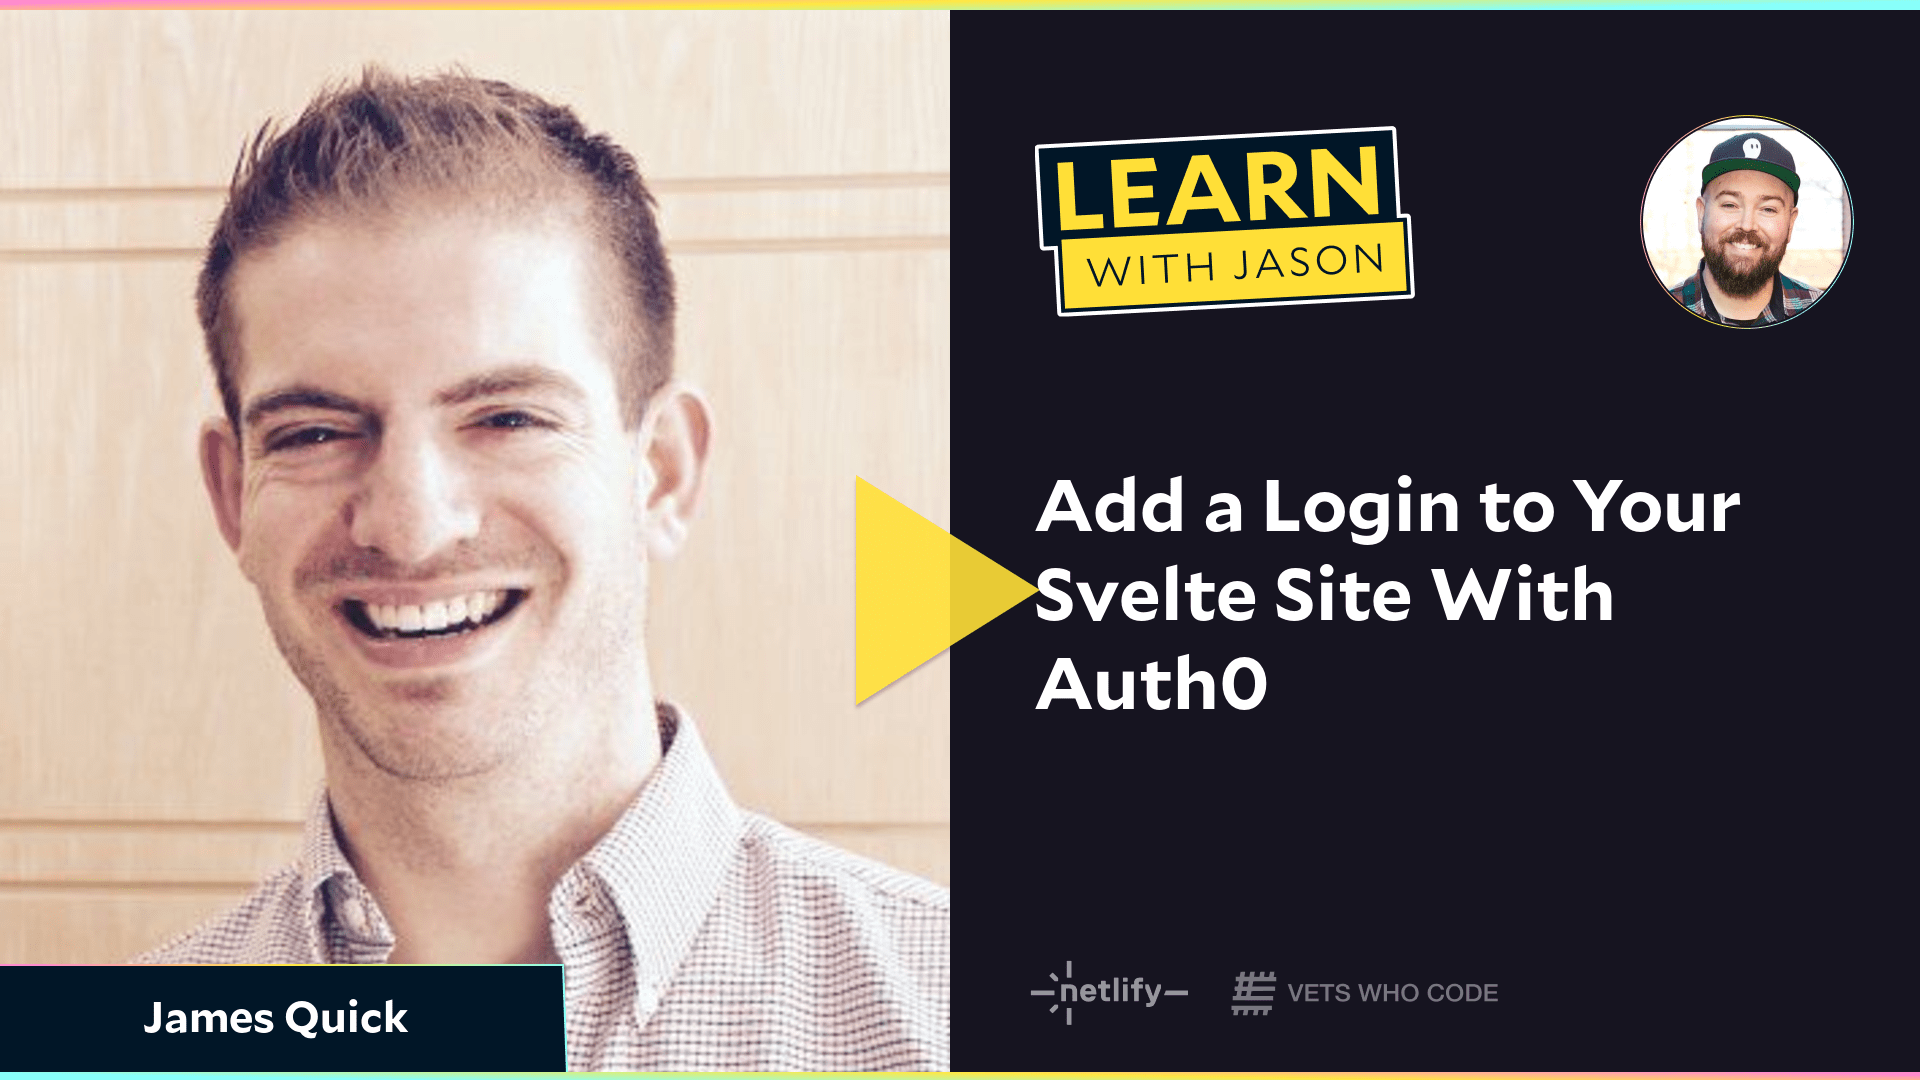 Add a Login to Your Svelte Site With Auth0 (with James Quick)